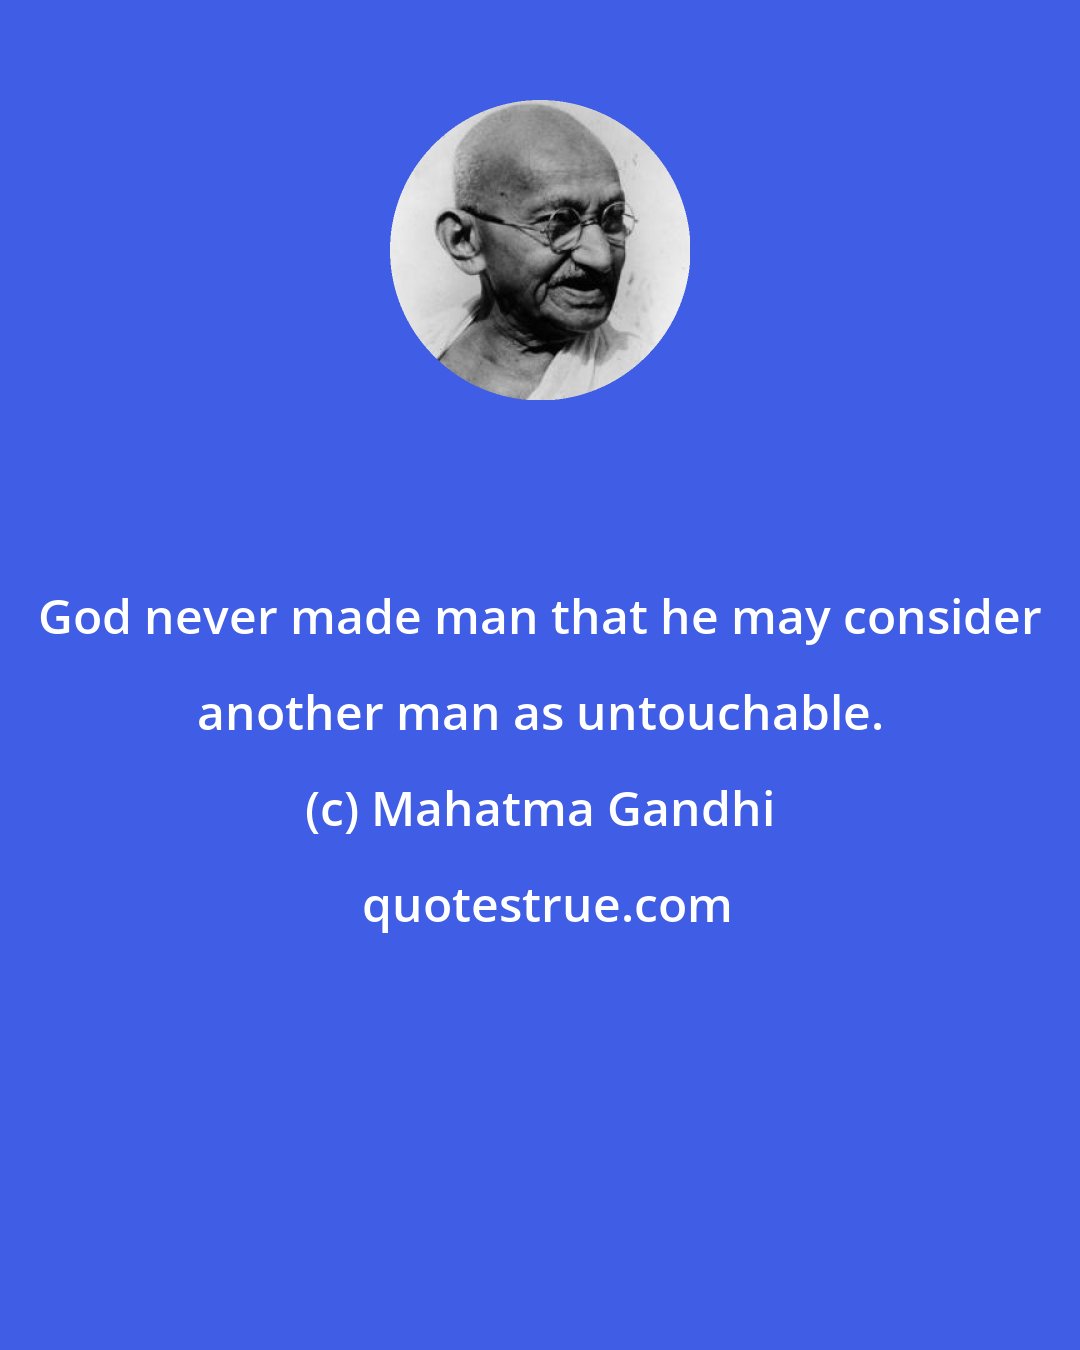 Mahatma Gandhi: God never made man that he may consider another man as untouchable.